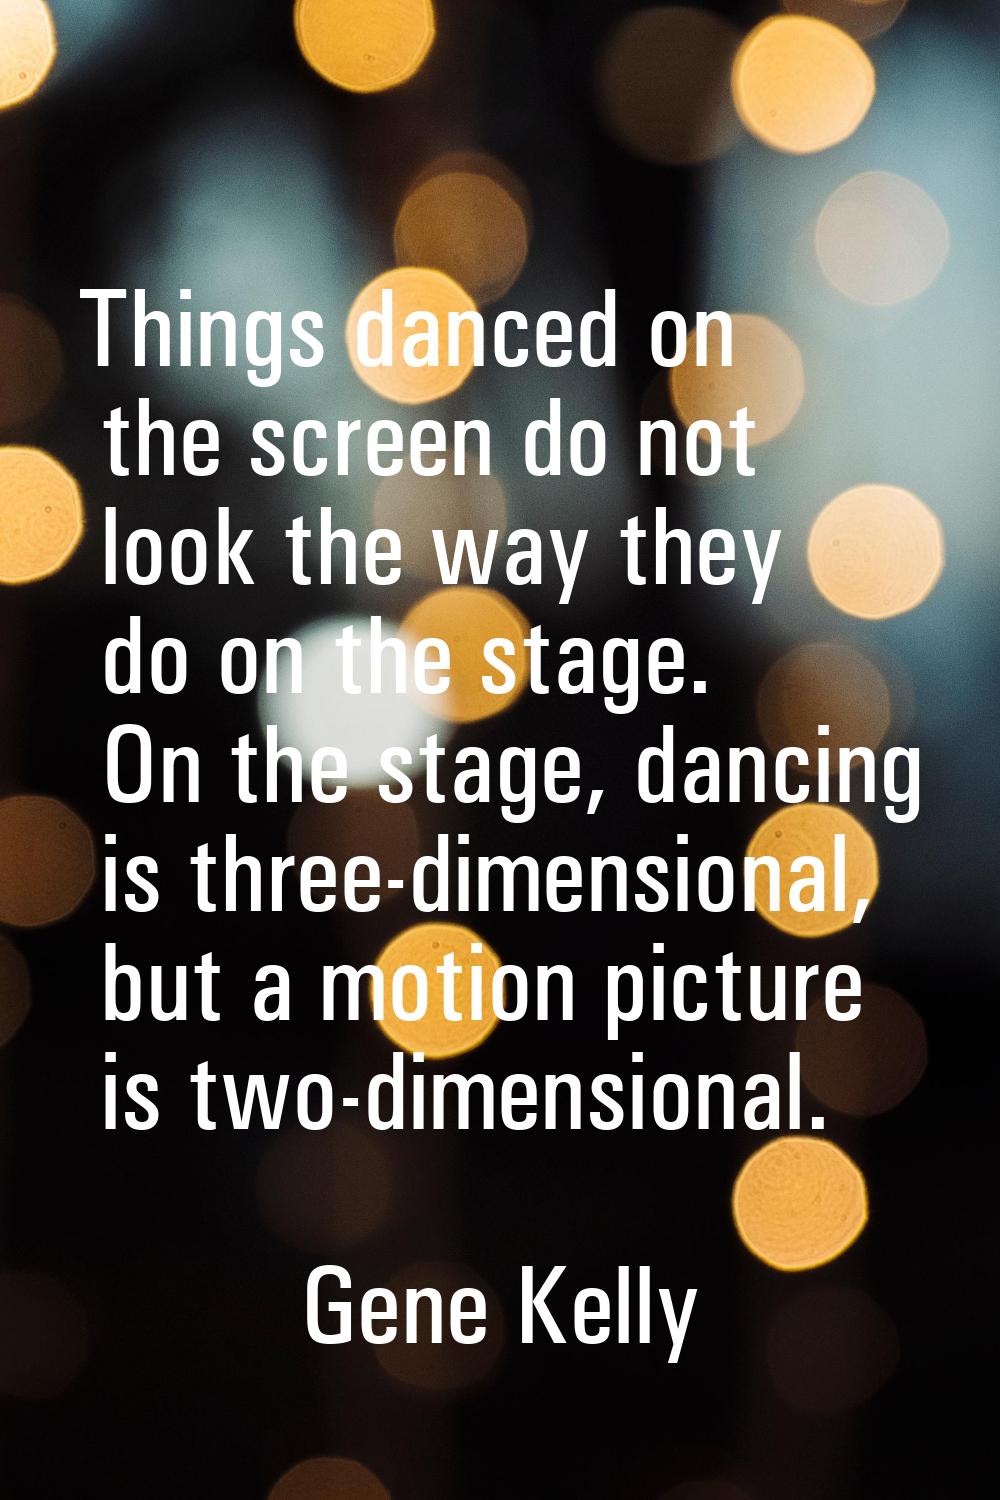 Things danced on the screen do not look the way they do on the stage. On the stage, dancing is thre